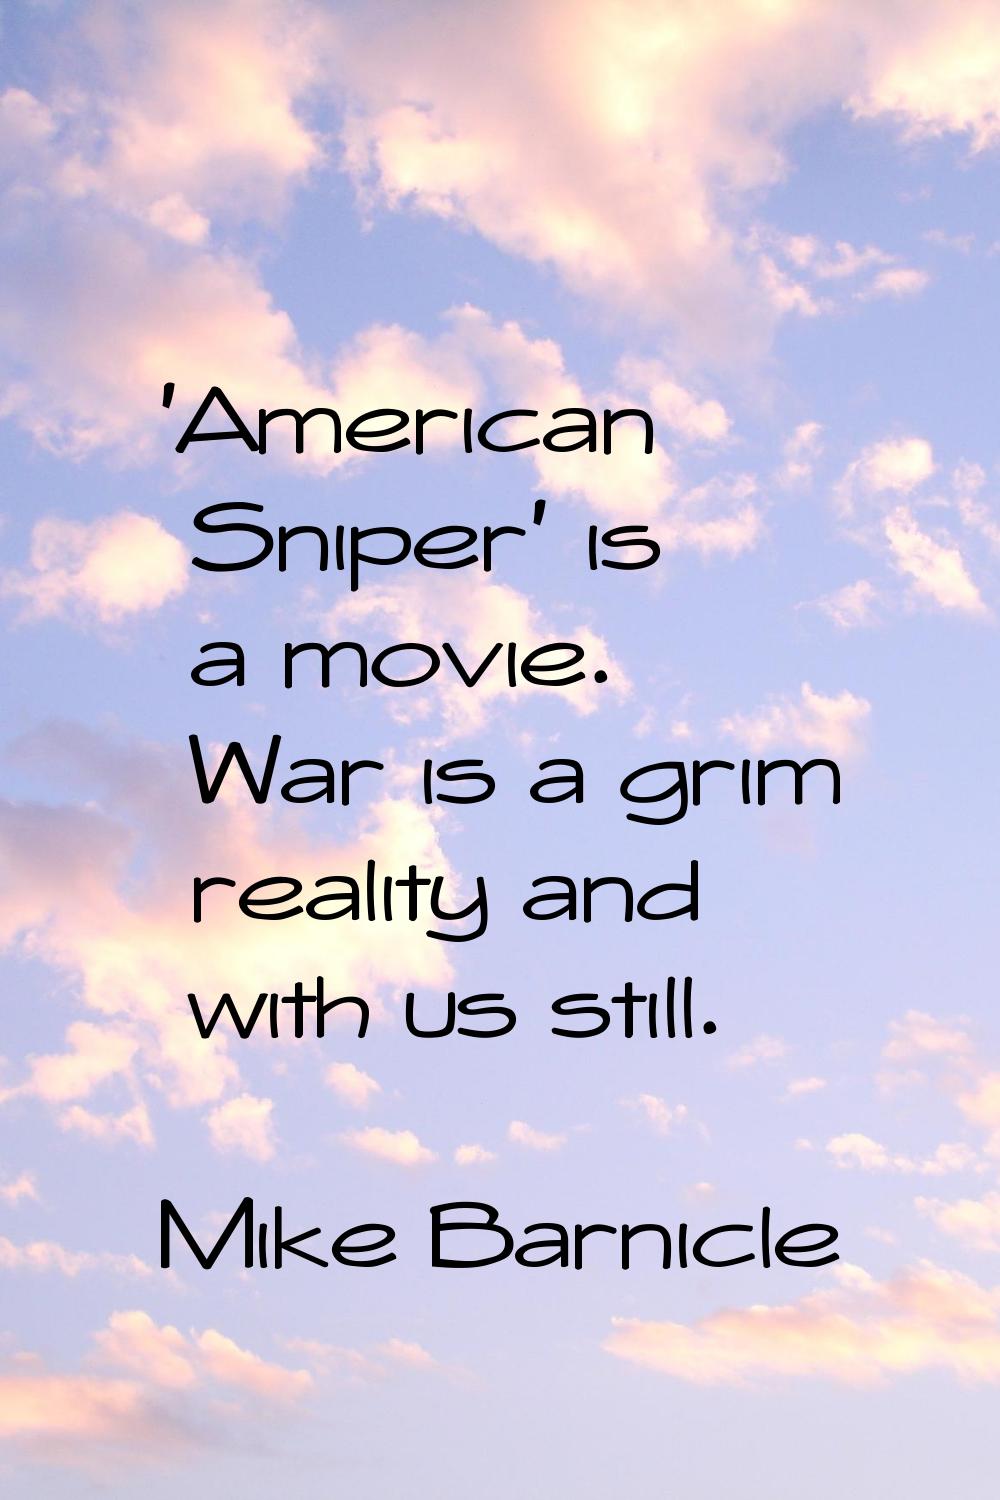 'American Sniper' is a movie. War is a grim reality and with us still.